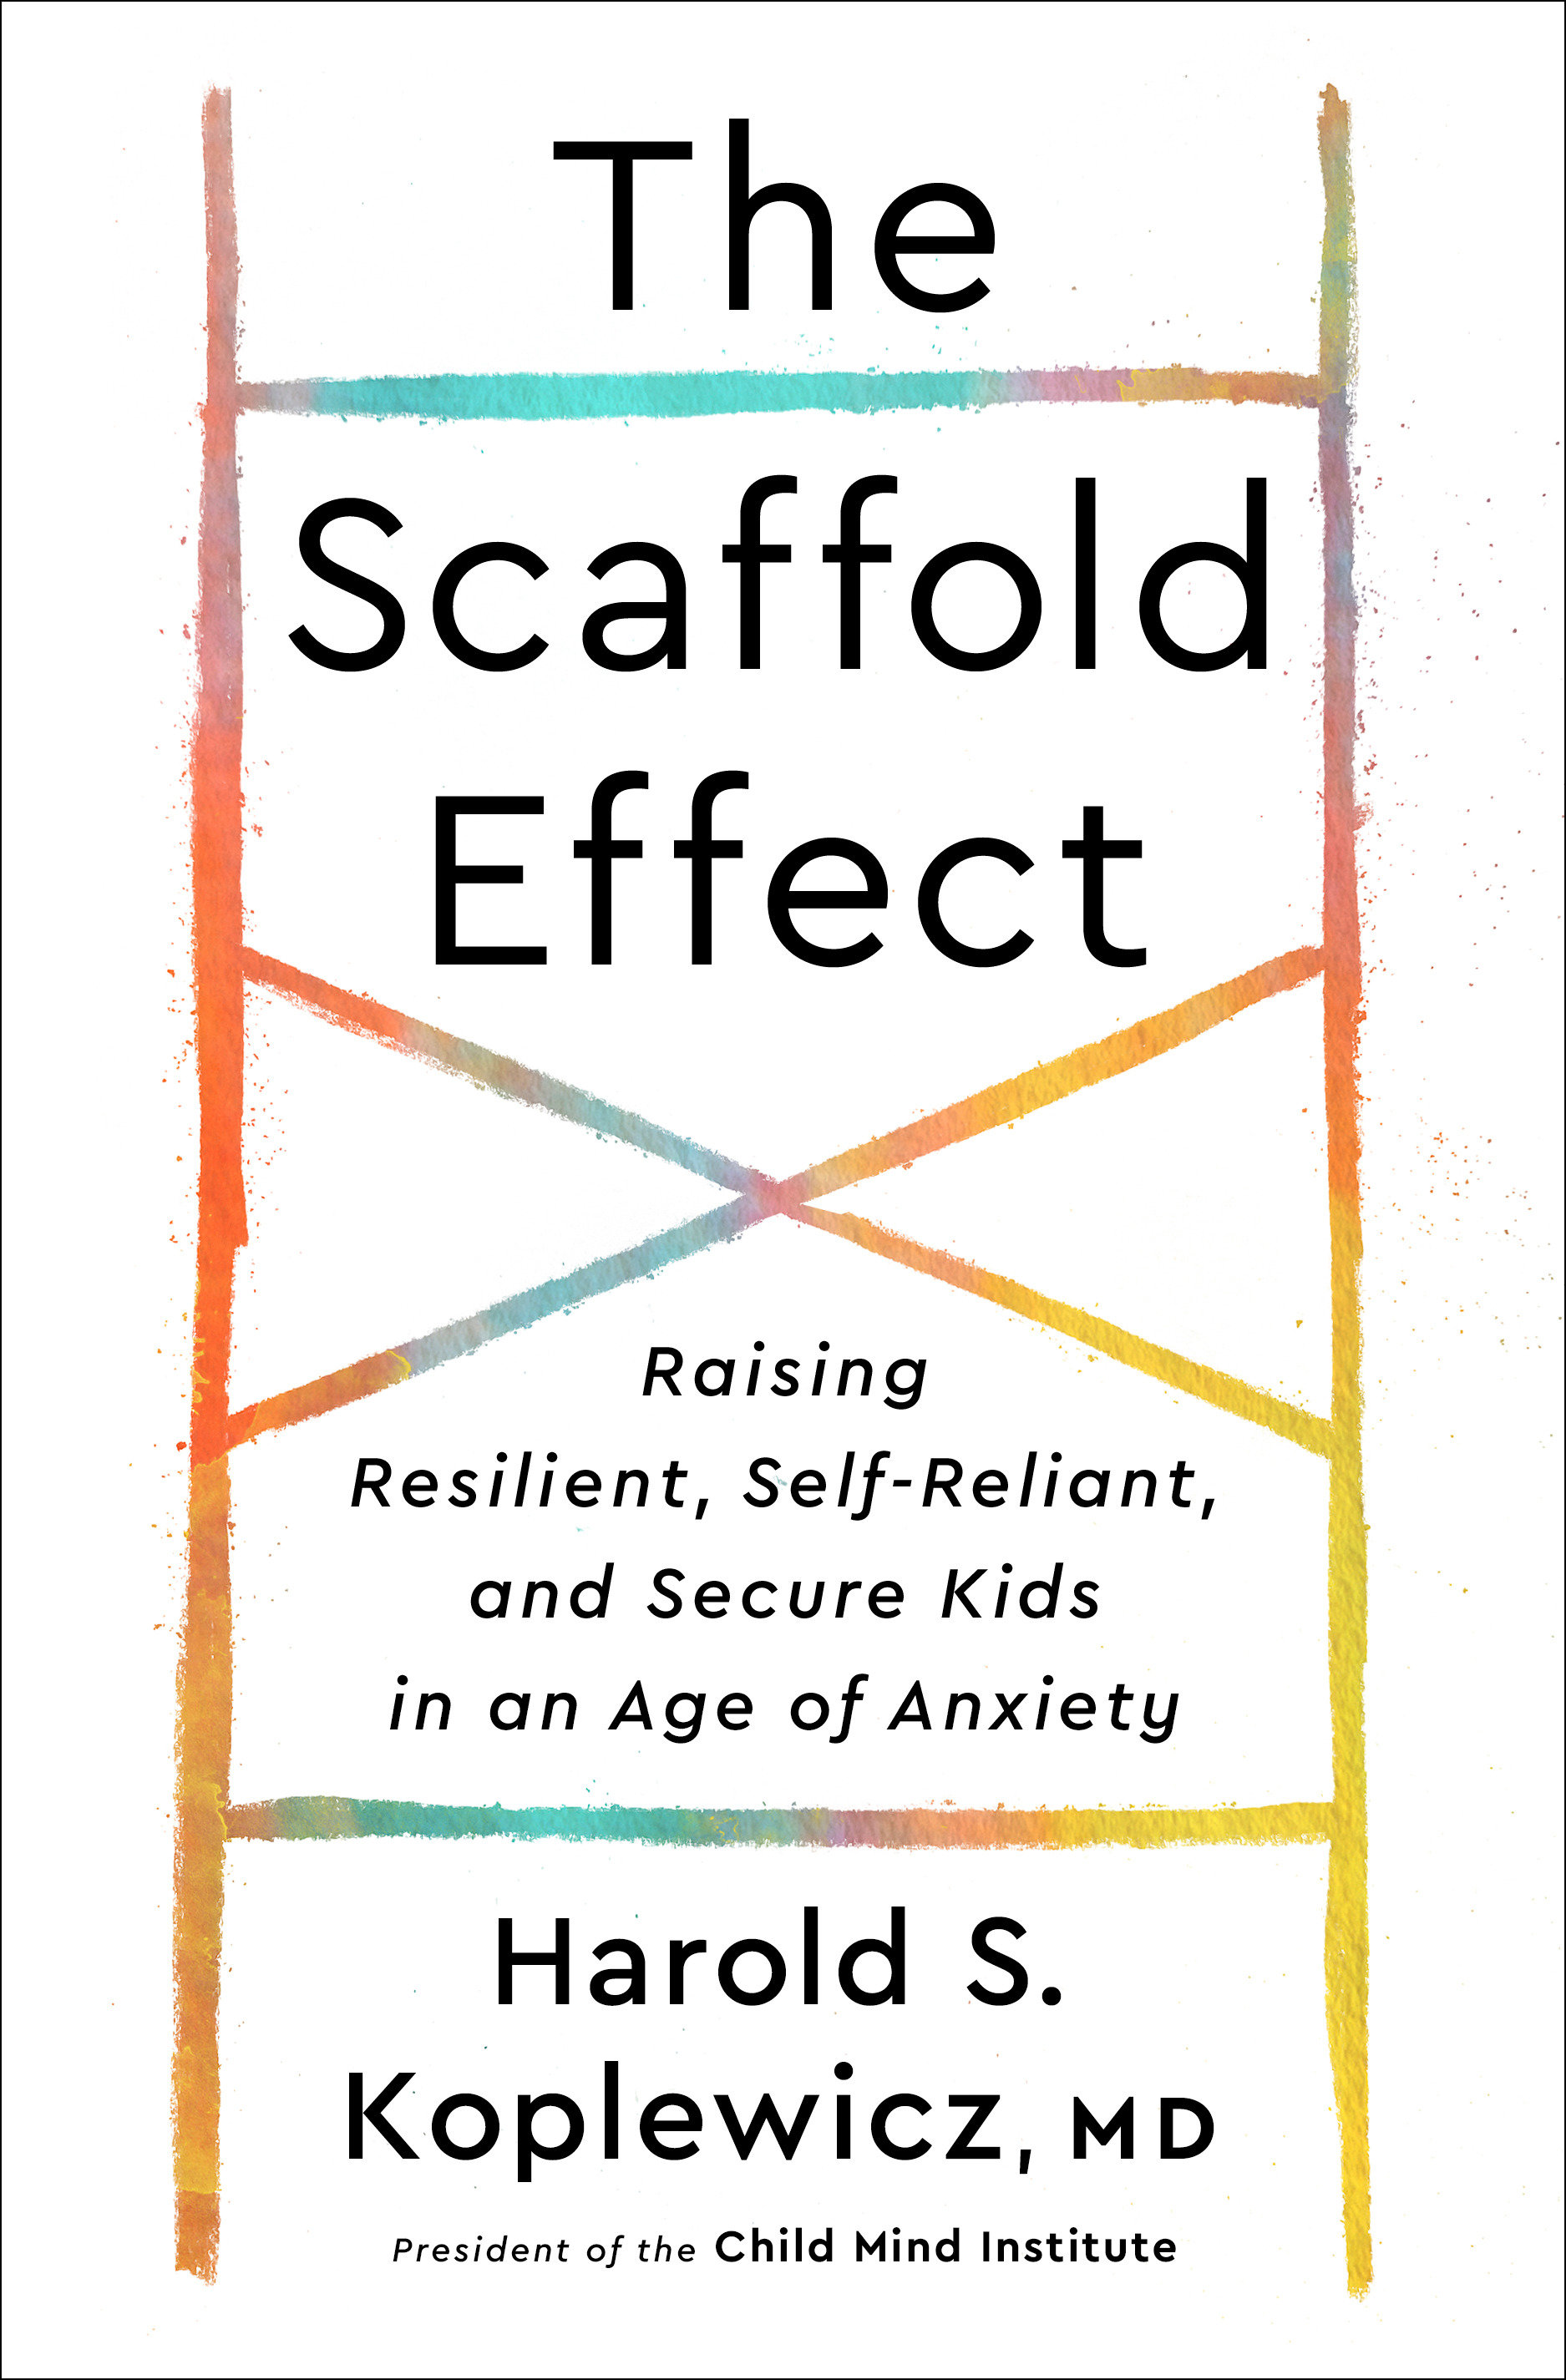 The Scaffold Effect (Hardcover Book)